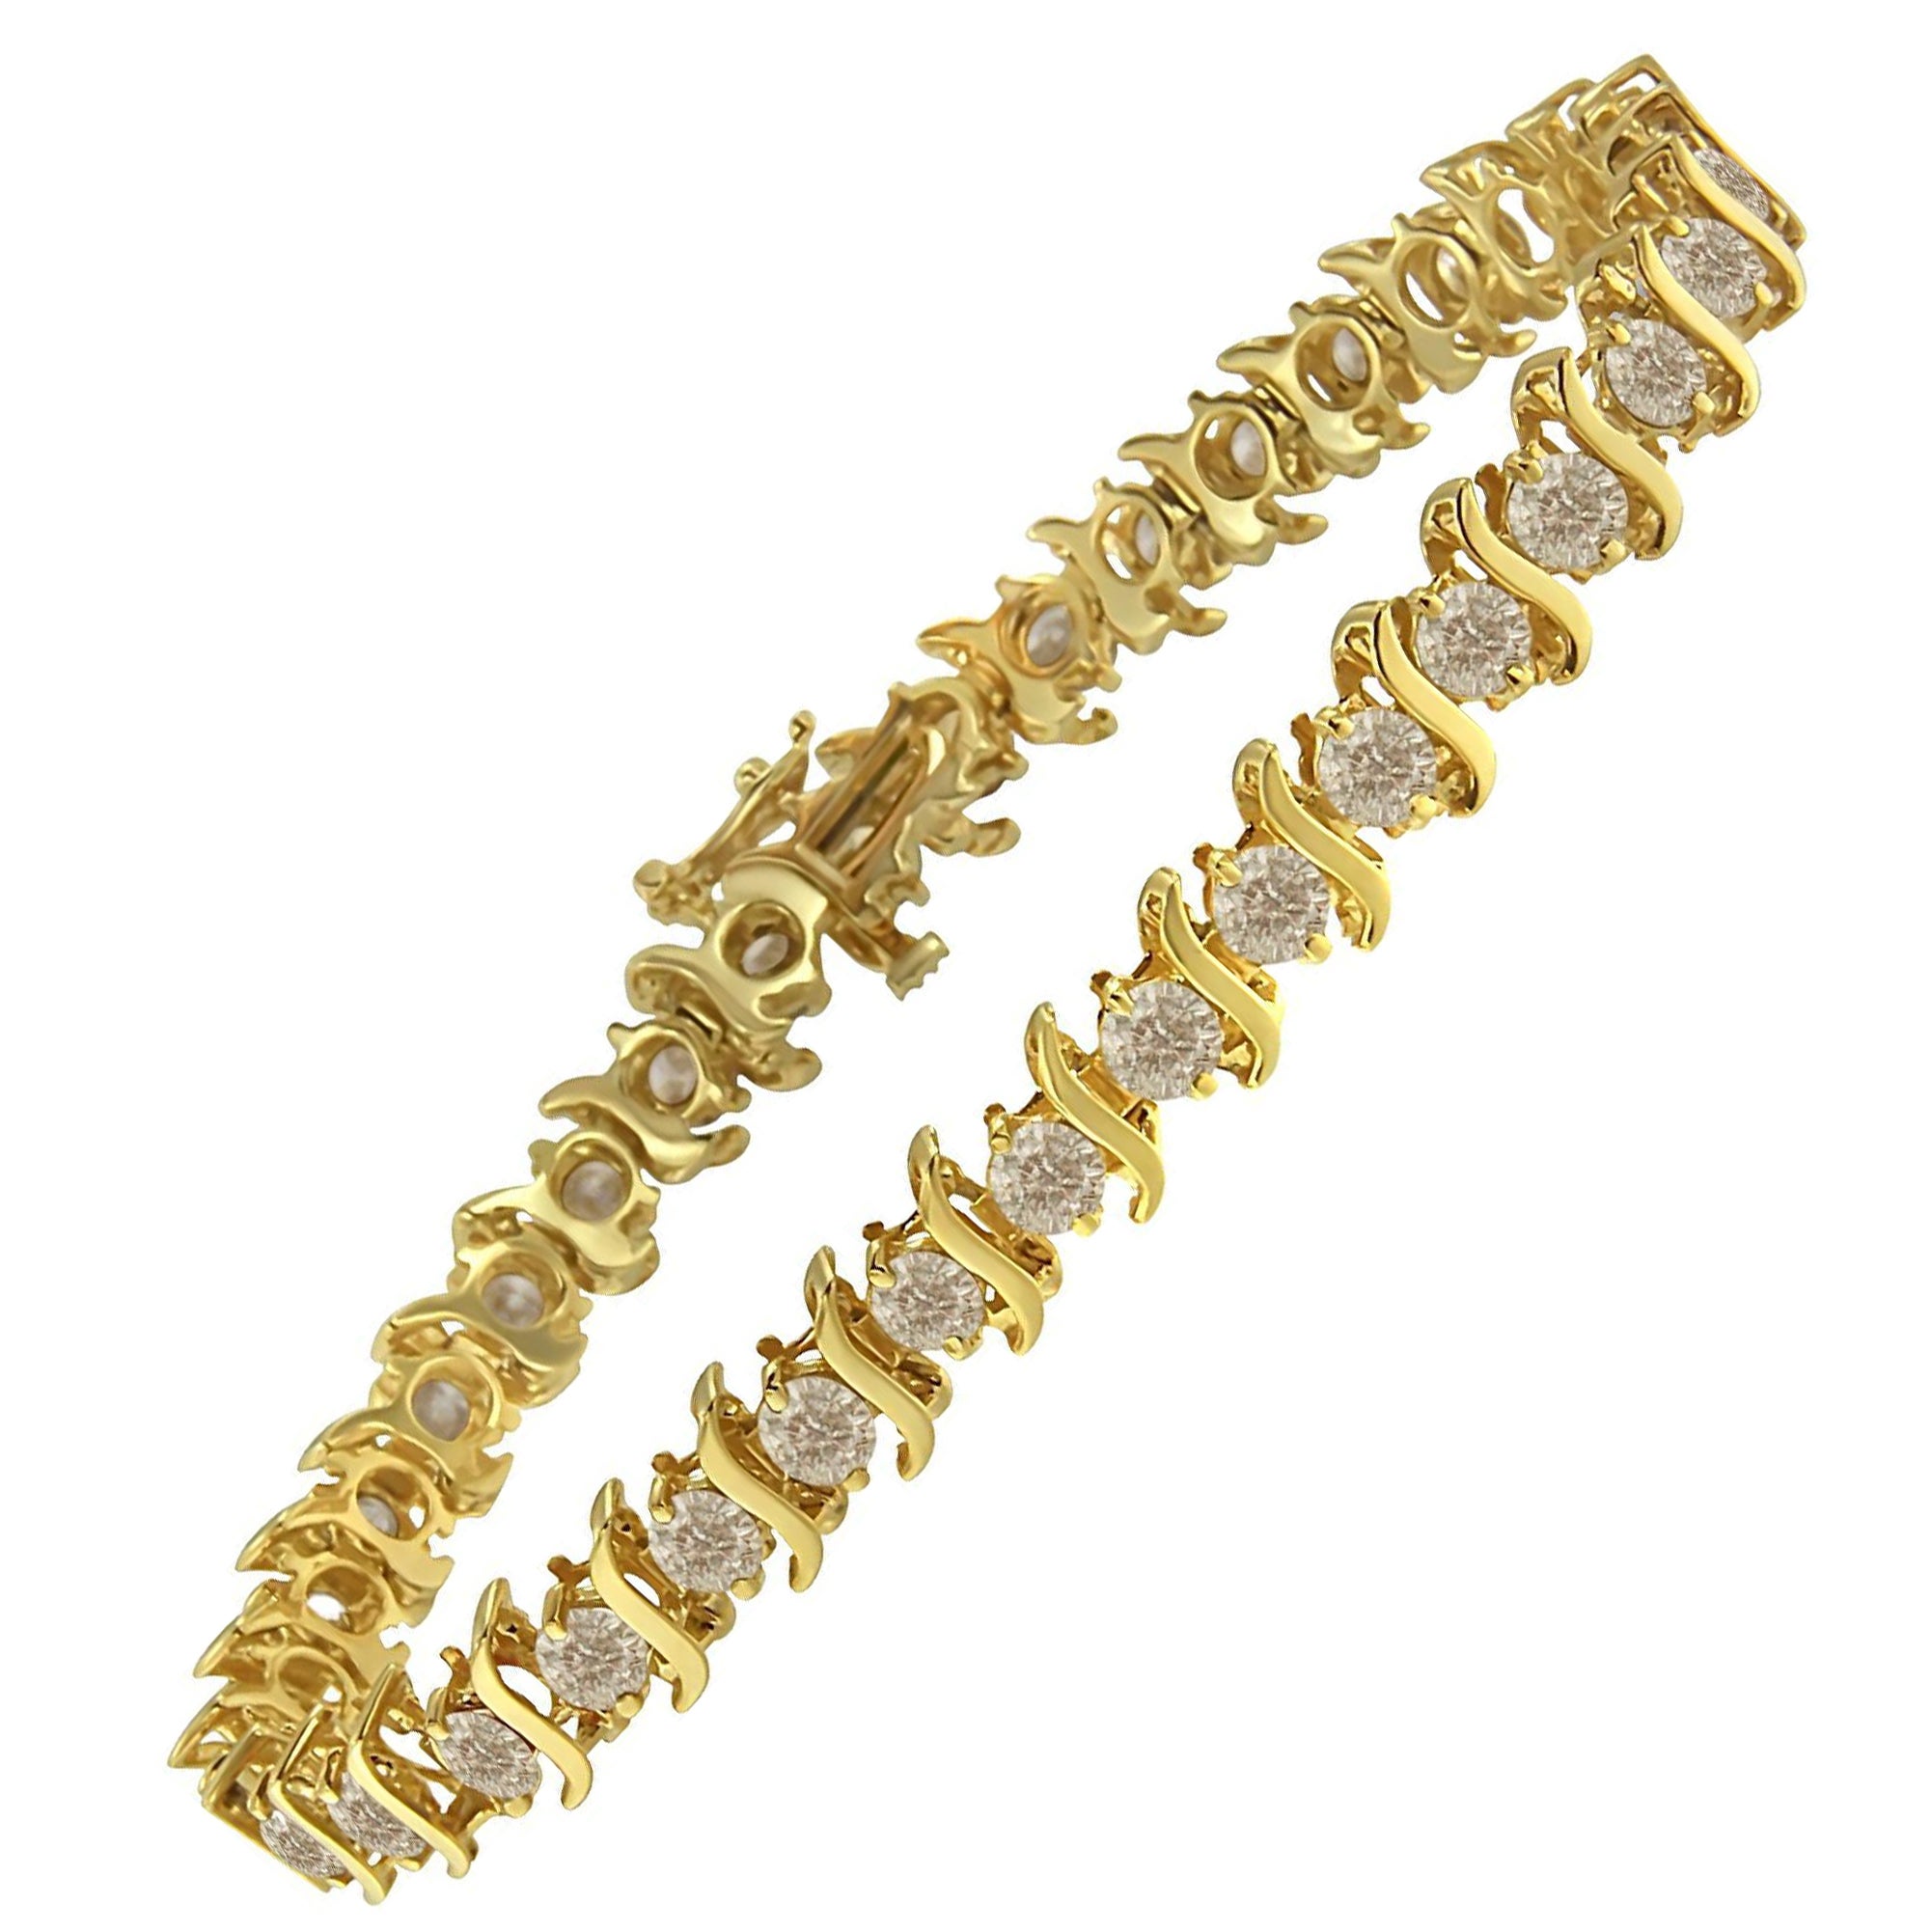 Yellow Gold-Plated Sterling Silver 7.00 Carat Diamond "S" Link Tennis Bracelet